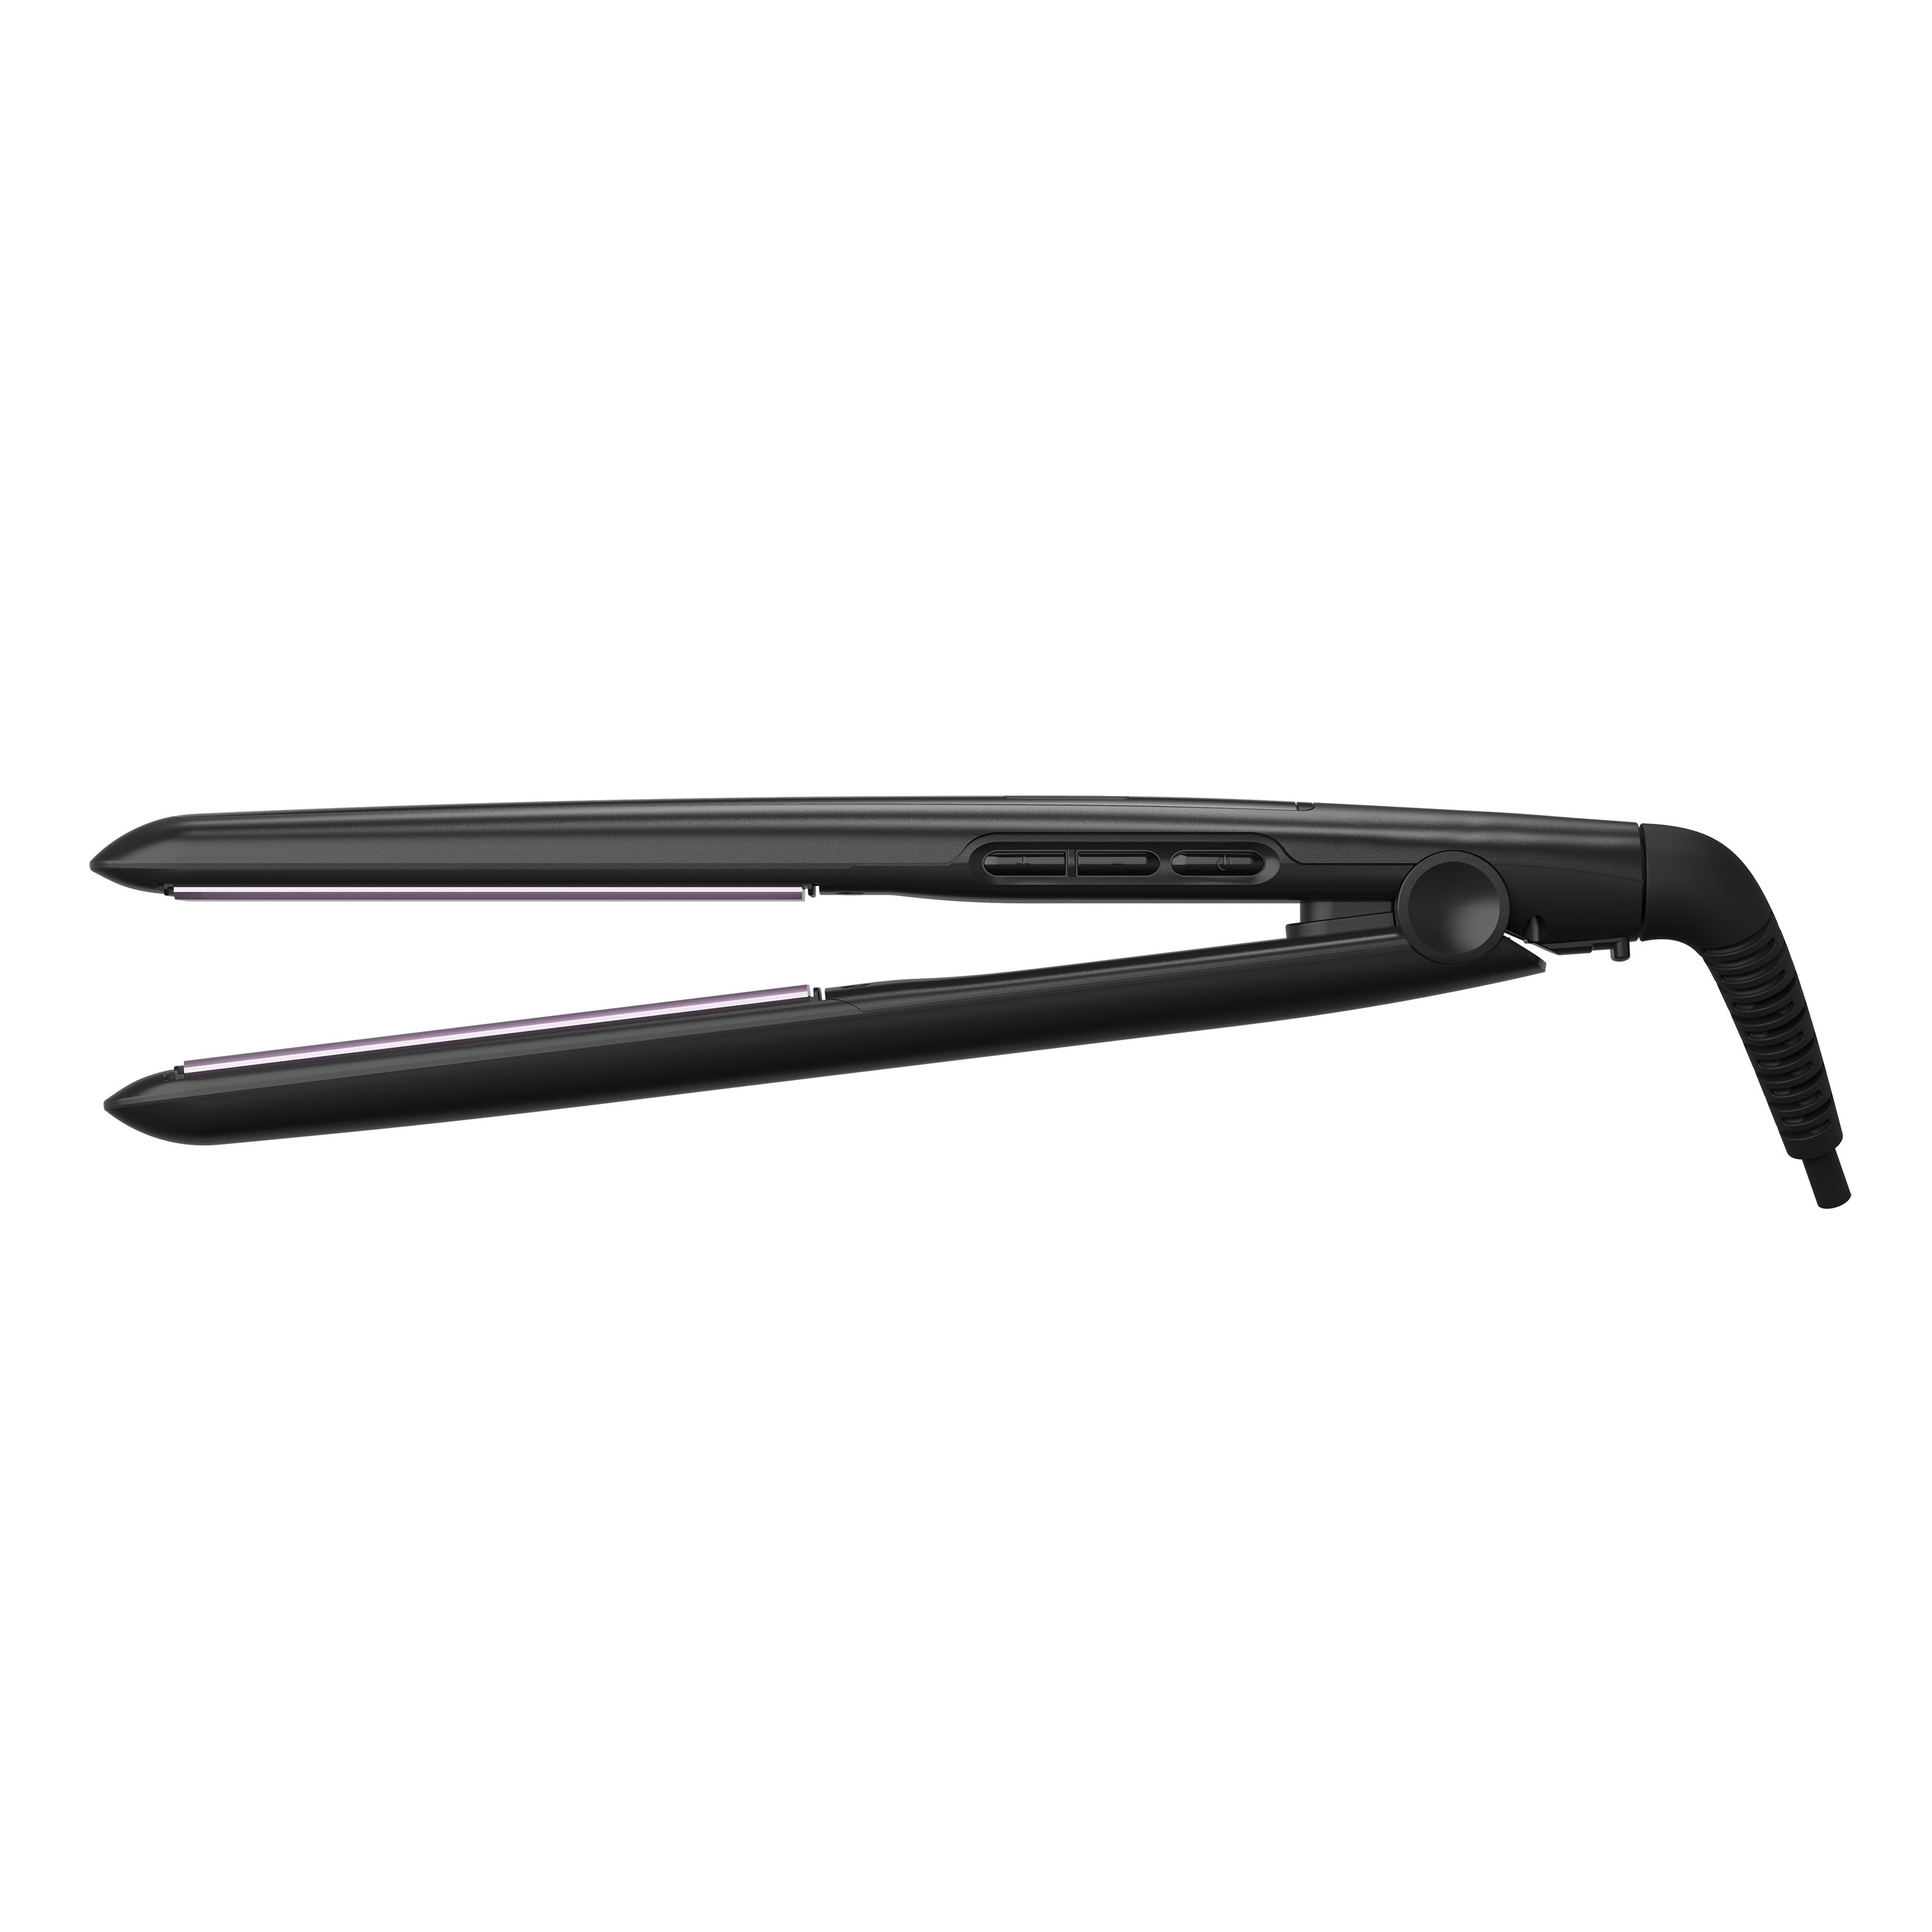 Remington 1" Anti-Static Flat Iron with Floating Ceramic Plates and Digital Controls, Hair Straightener, Black - image 2 of 8